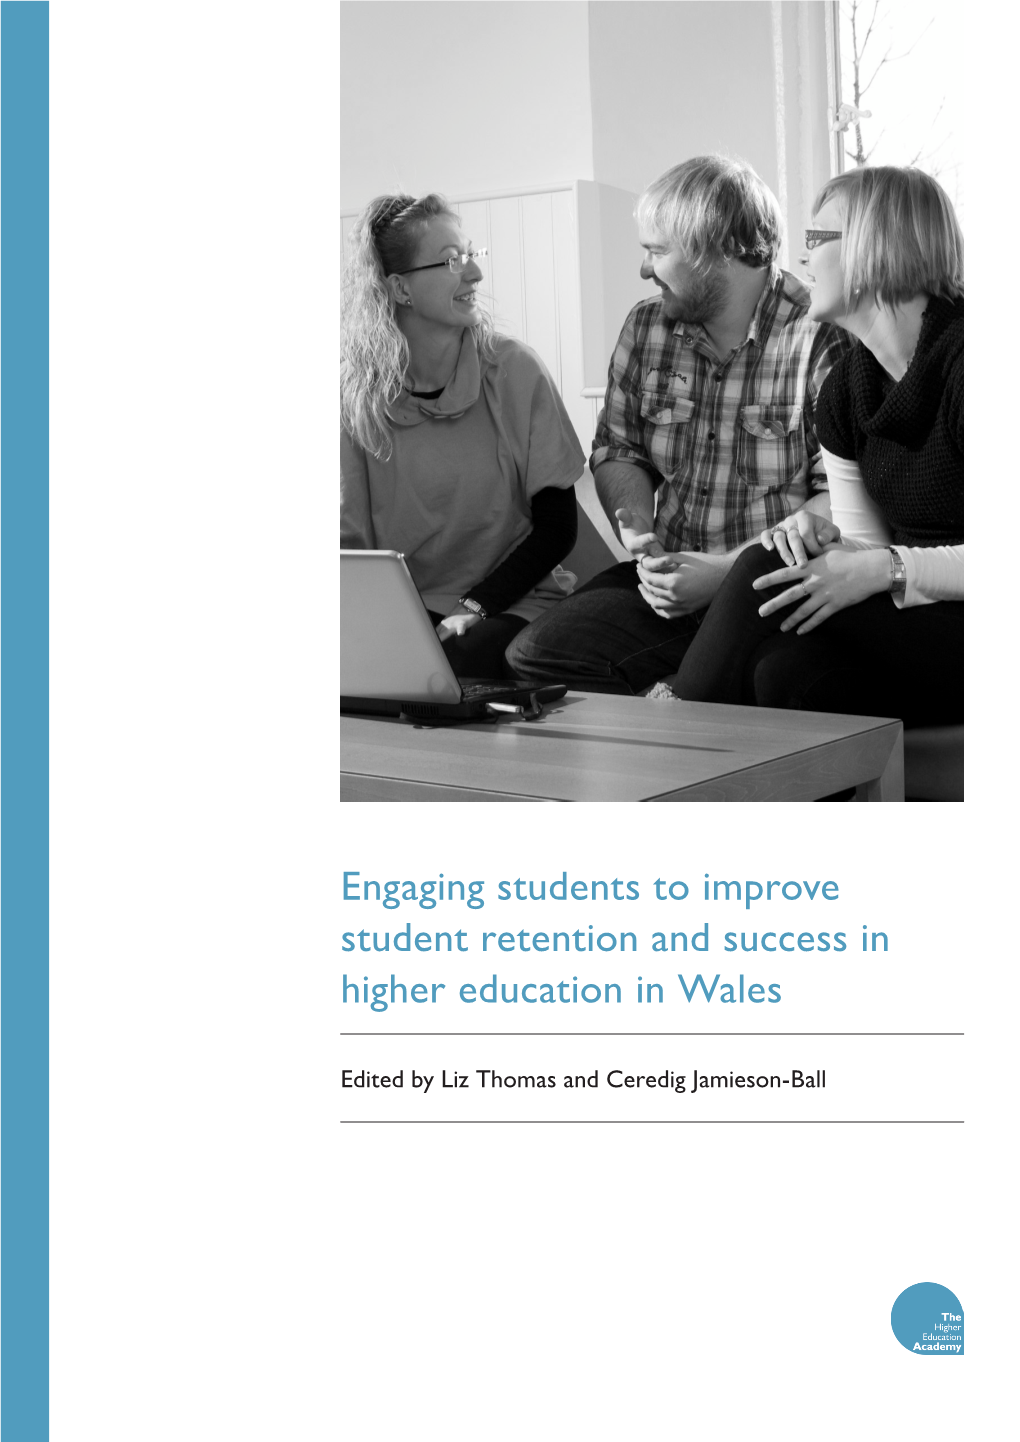 Engaging Students to Improve Student Retention and Success in Higher Education in Wales